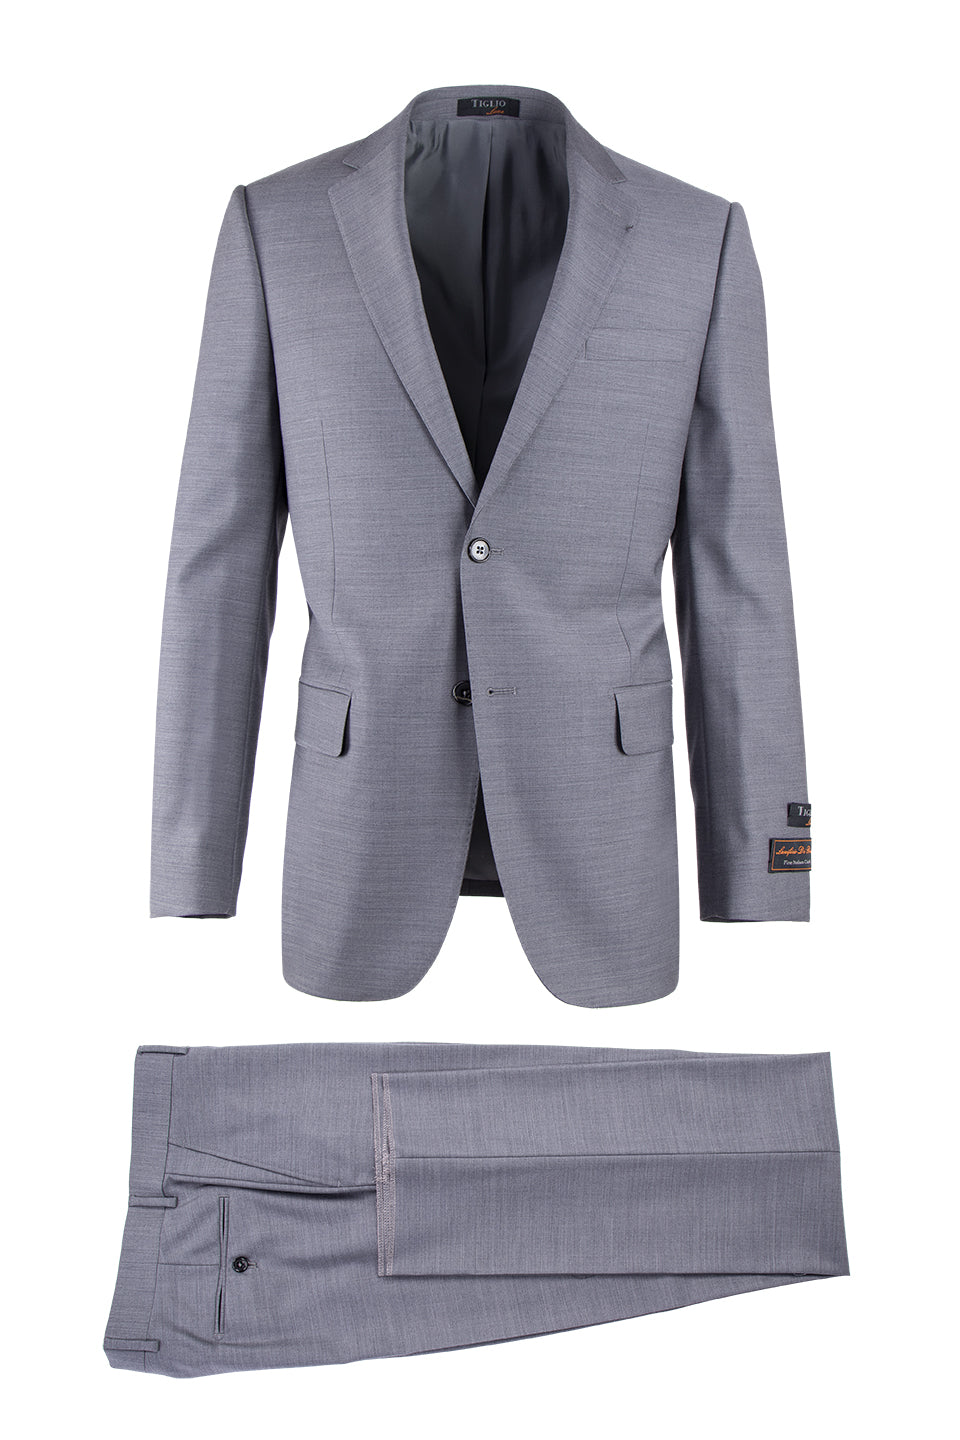 Novello Light Gray, Modern Fit, Pure Wool Suit by Tiglio Luxe E09063/2 ...